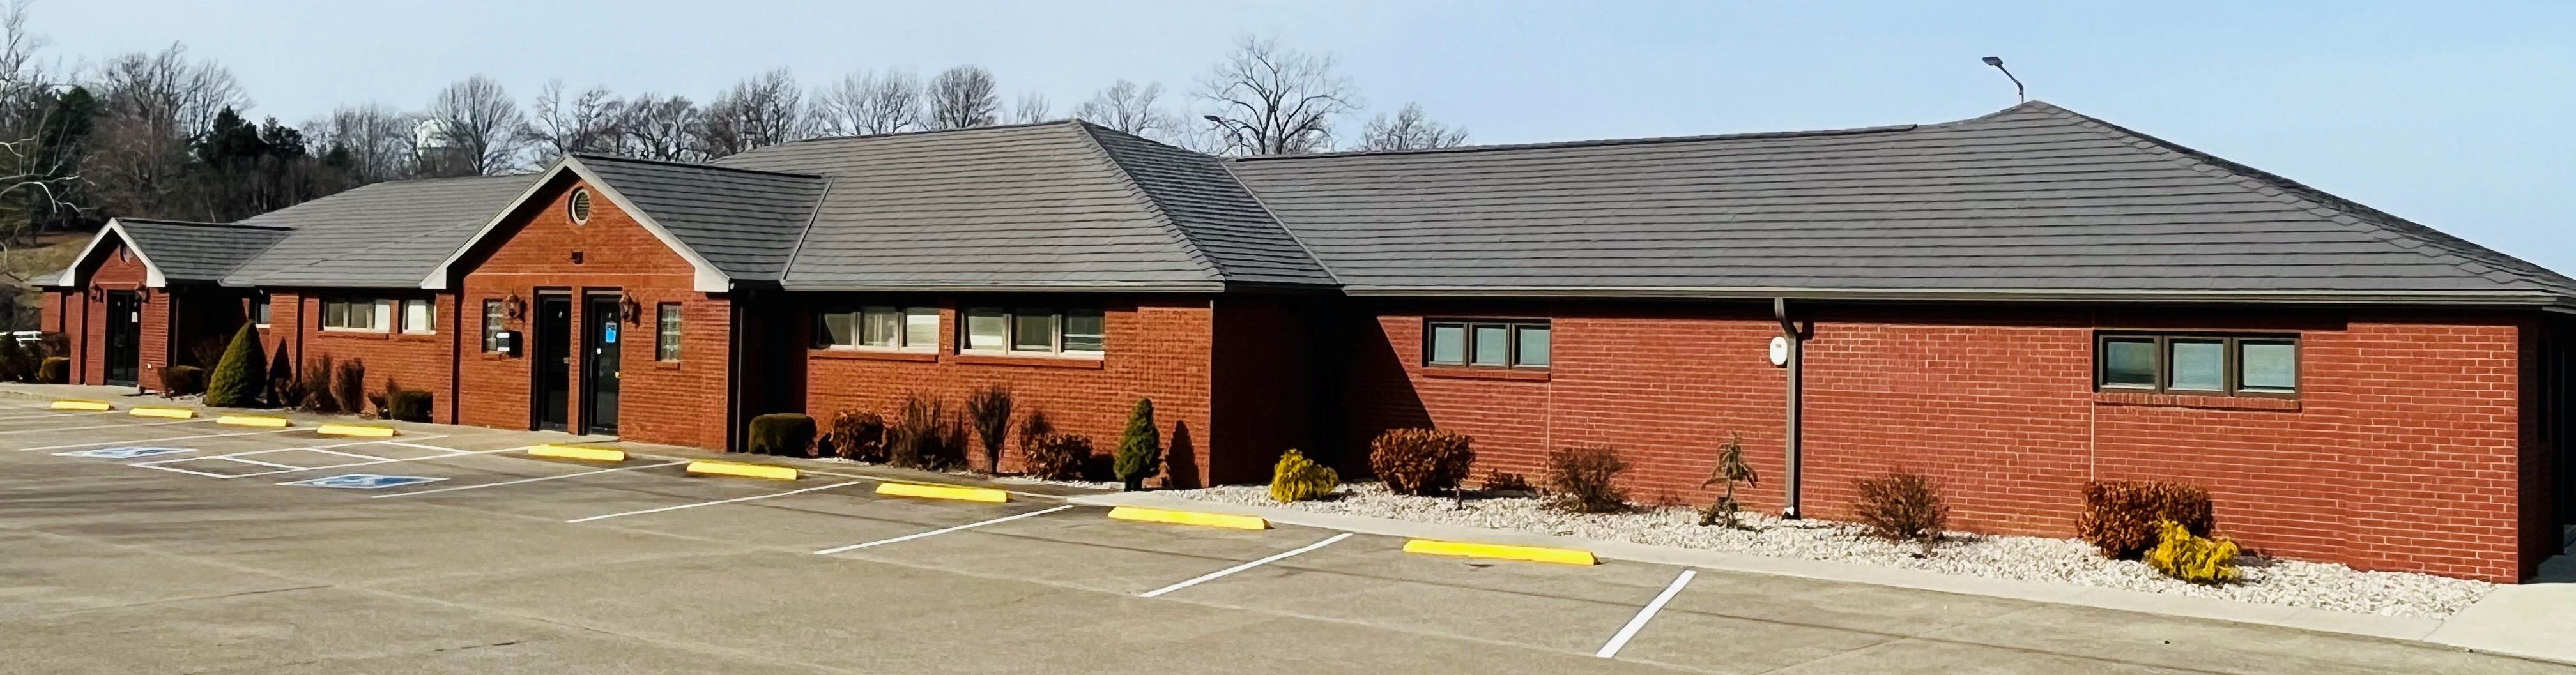 red brick building, union county extension office